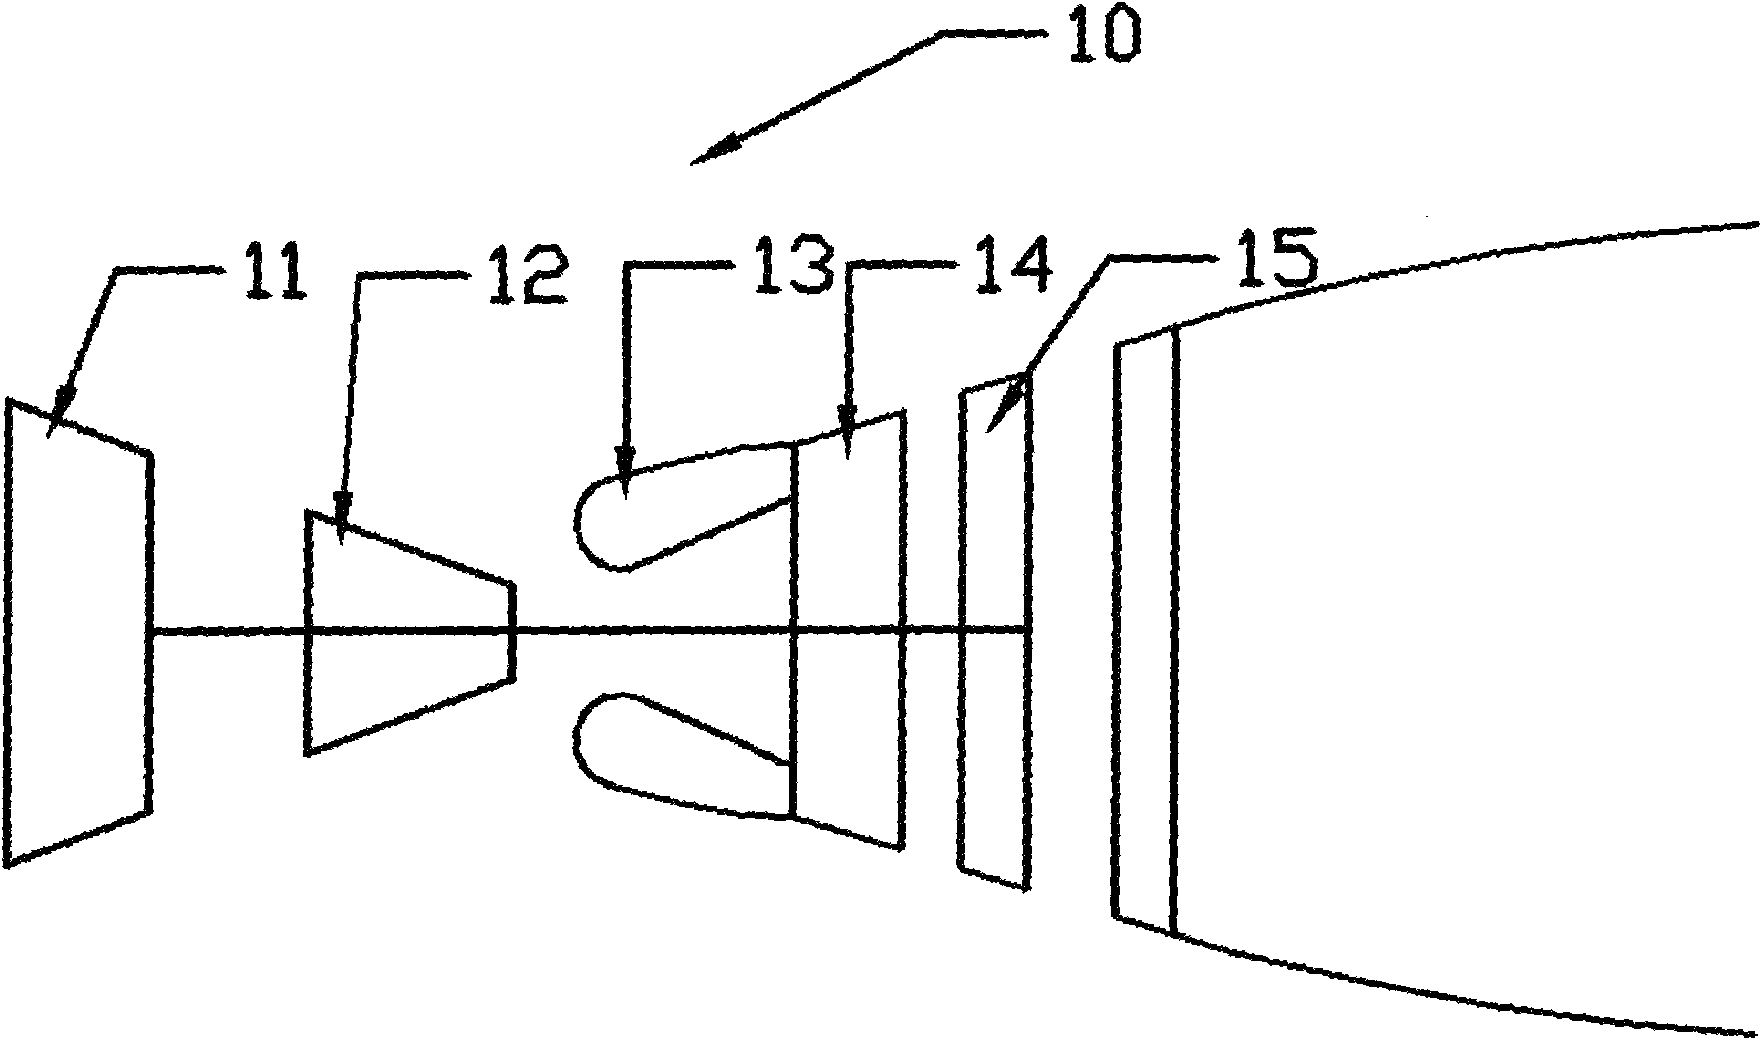 Circumferentially graded low-pollution combustion chamber with multiple middle spiral-flow flame stabilizing stages